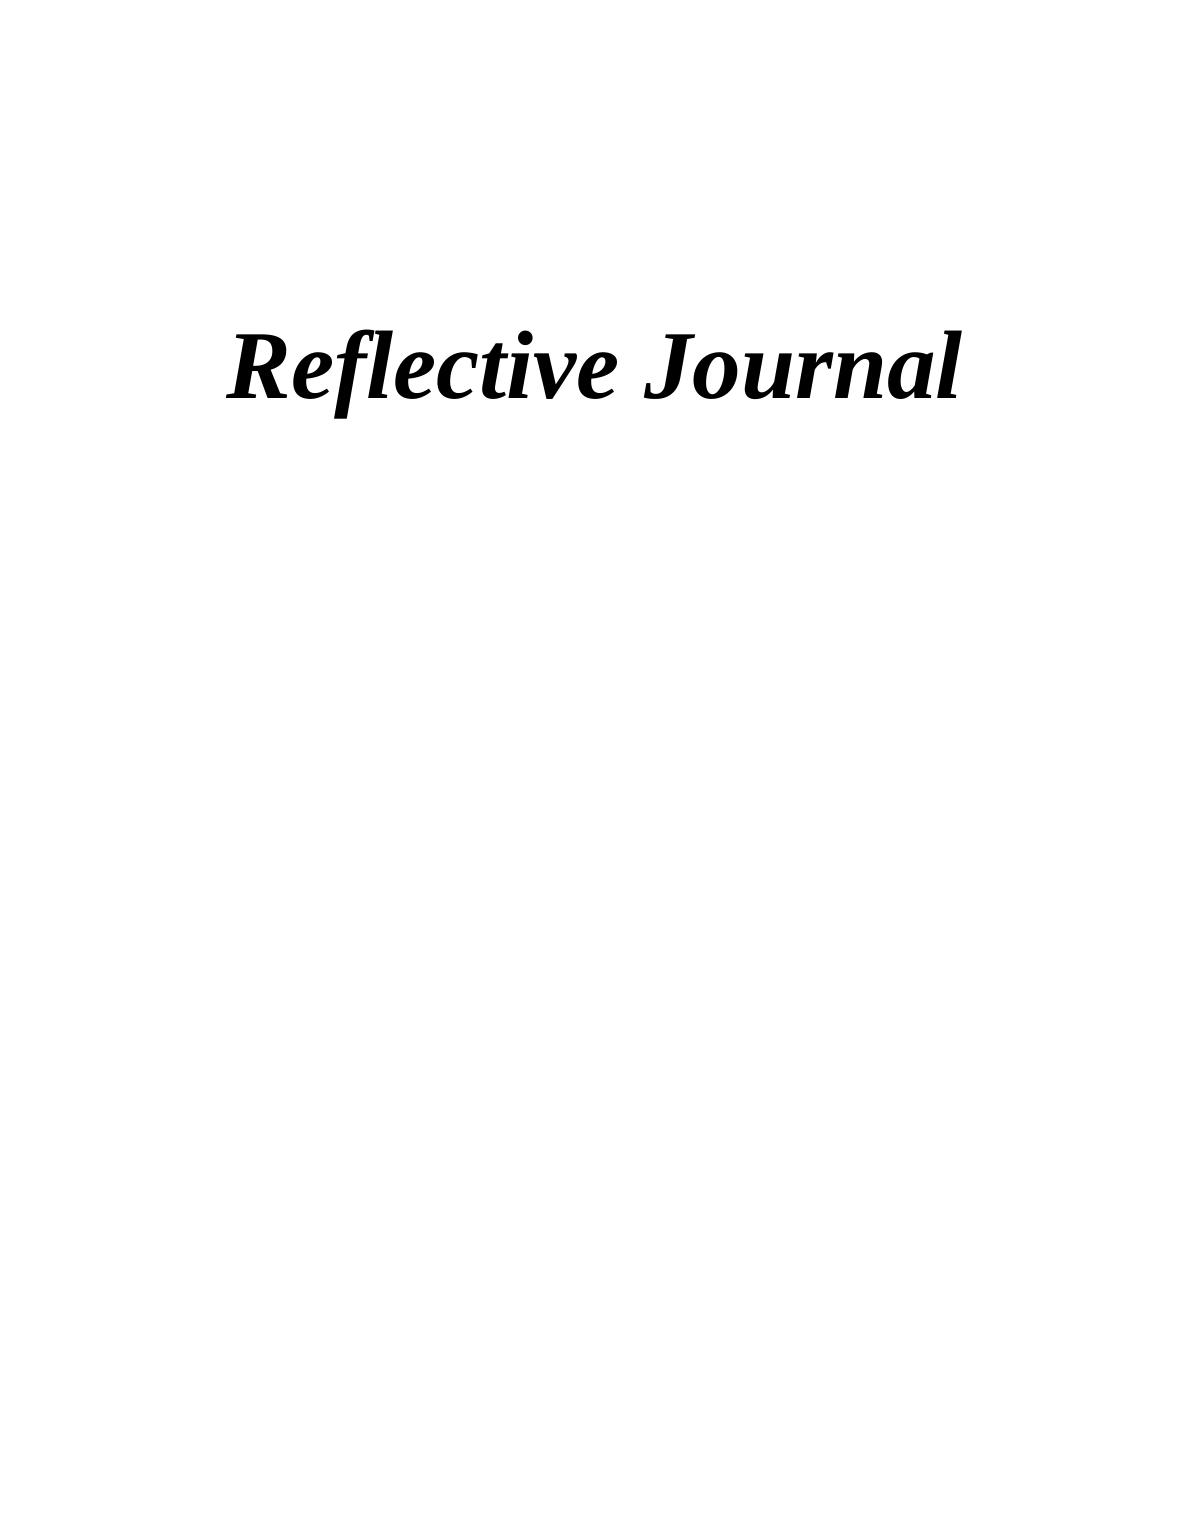 Reflective Journal: Task and Module Completion in Achieving Employability and Study Skills_1